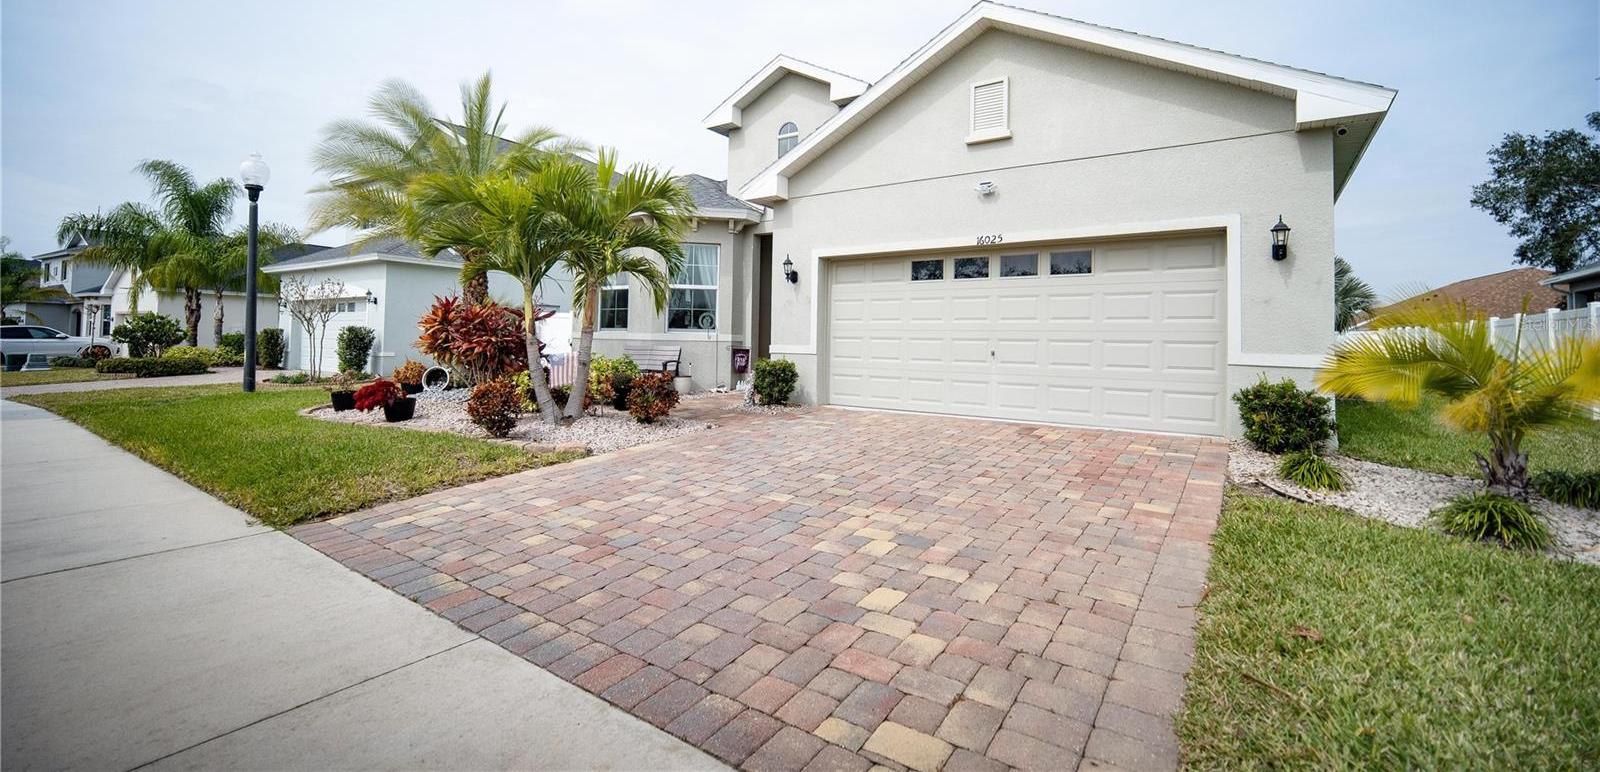 Photo one of 16025 Champlain St Clermont FL 34714 | MLS S5100501